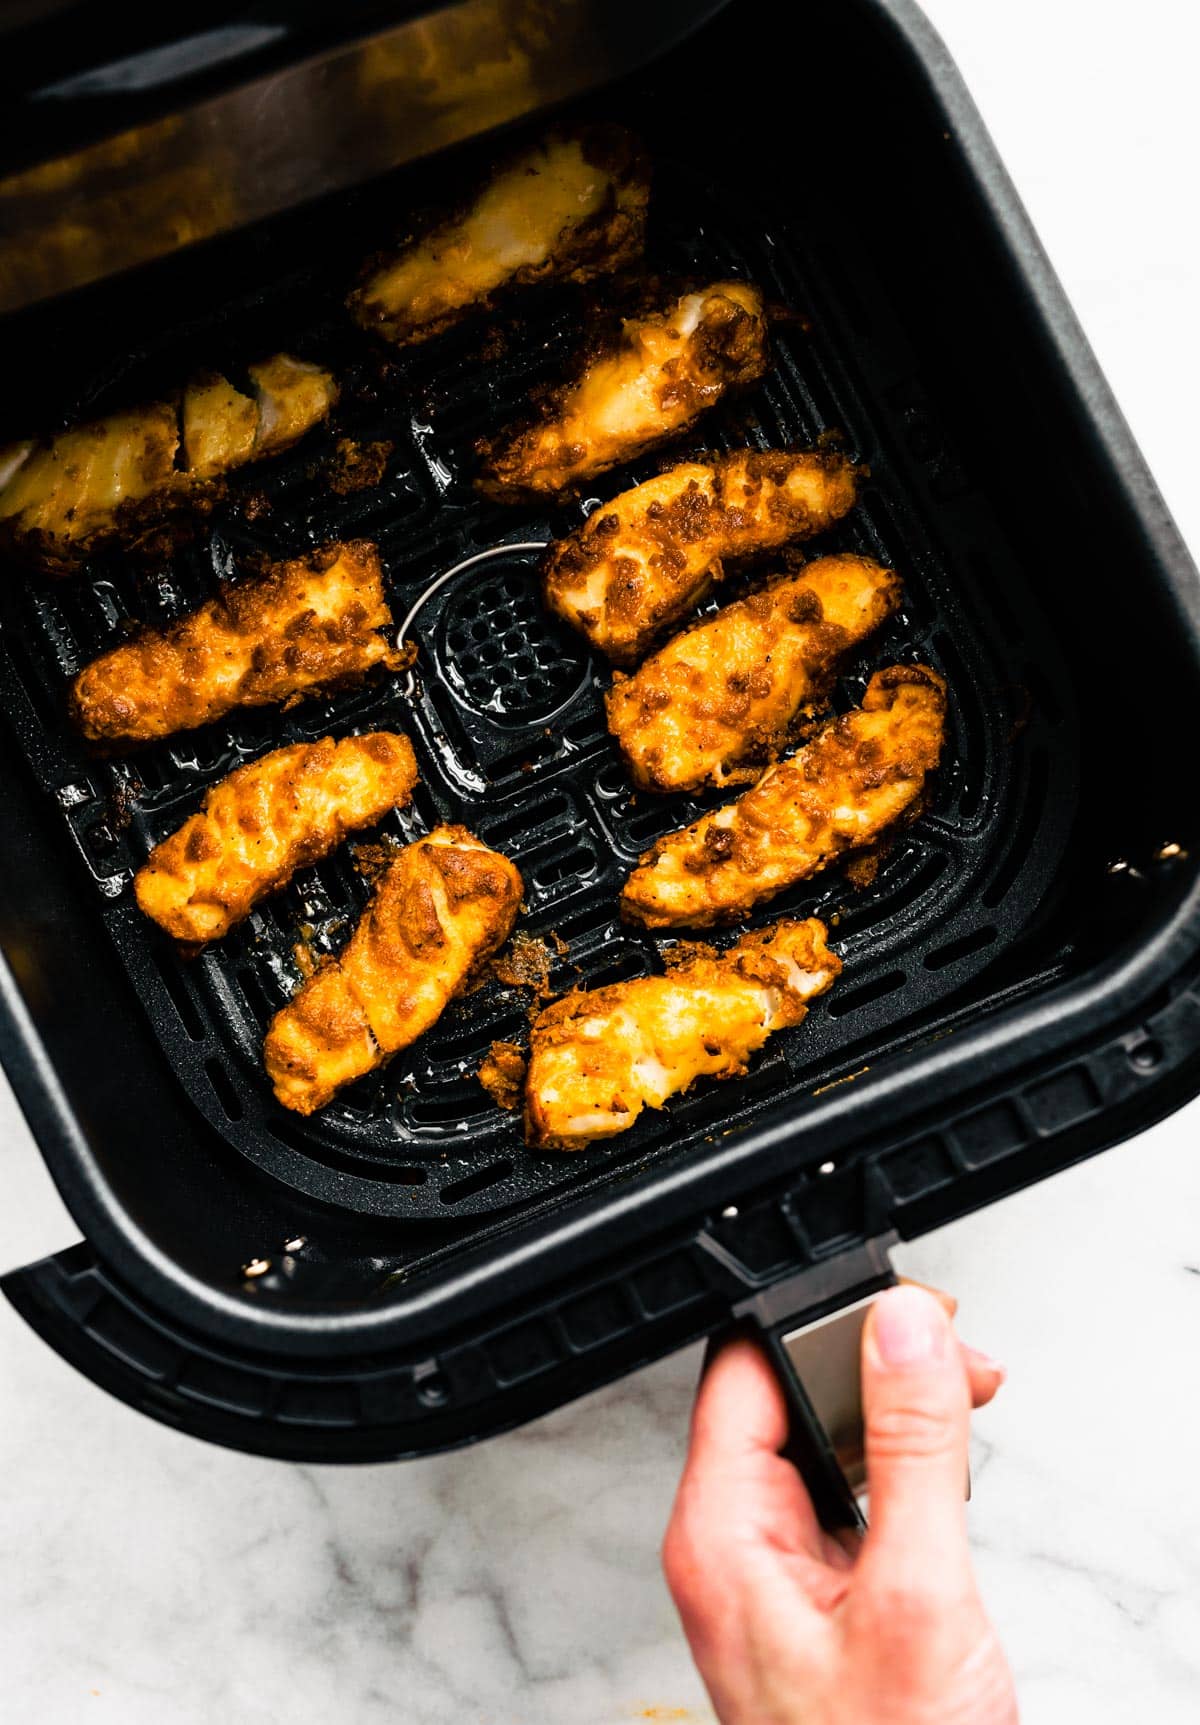 A hand pulling out an air fryer basket full of pieces of gluten-free beer-battered fish.